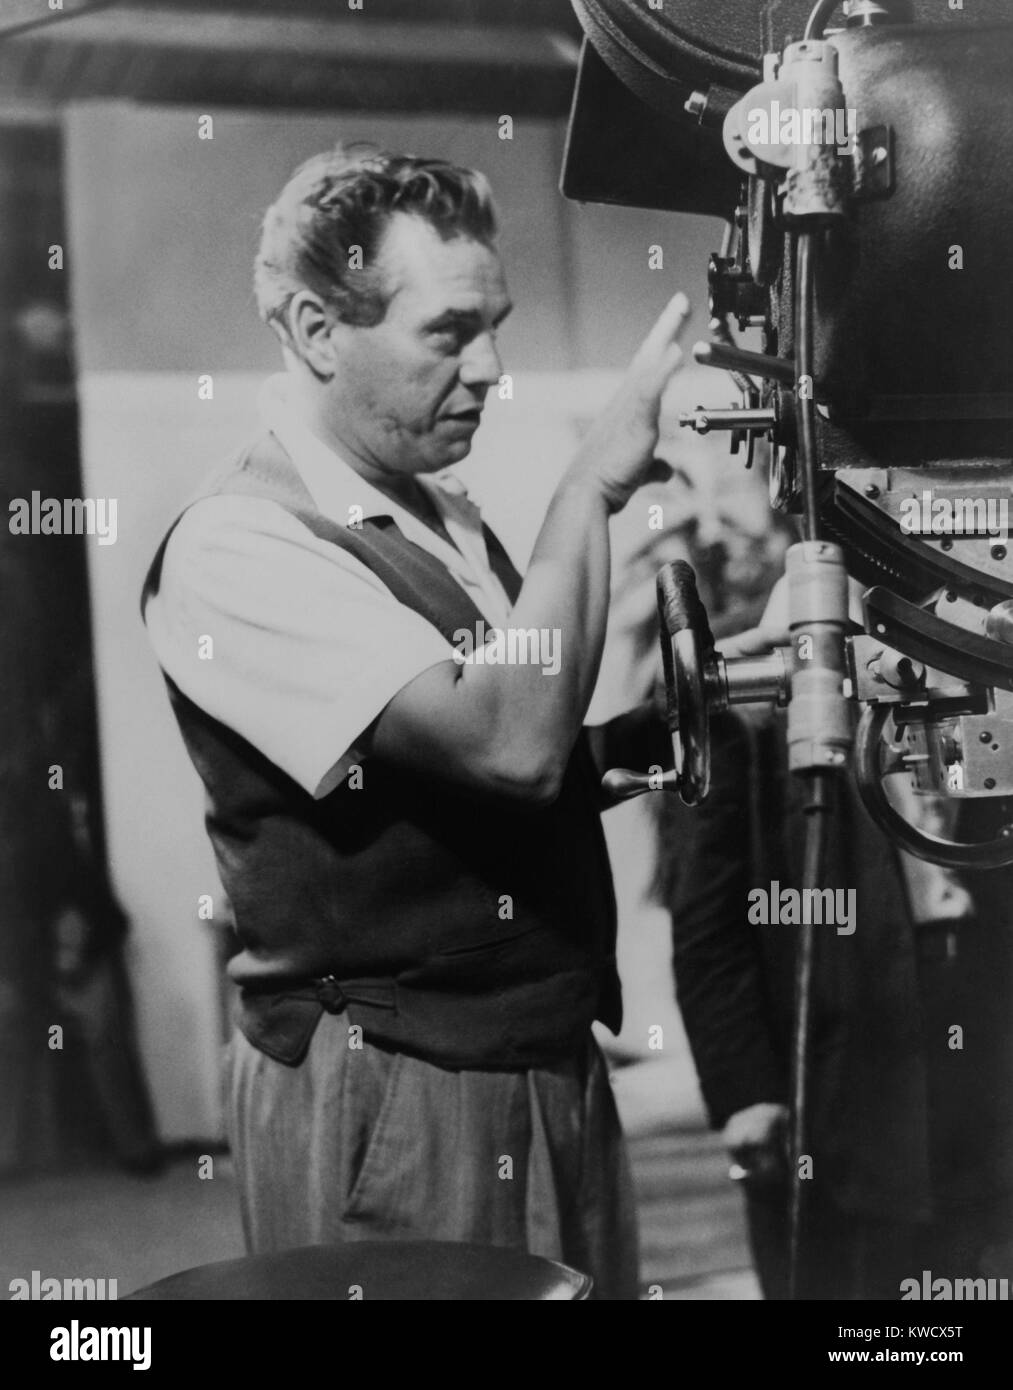 Desi Arnaz at a camera as executive producer of I LOVE LUCY TV series from 1952-57. Desilu Productions filmed the live performances with multiple sets and camera. Arnaz negotiated ownership and control of all rights to the film (BSLOC 2017 2 192) Stock Photo